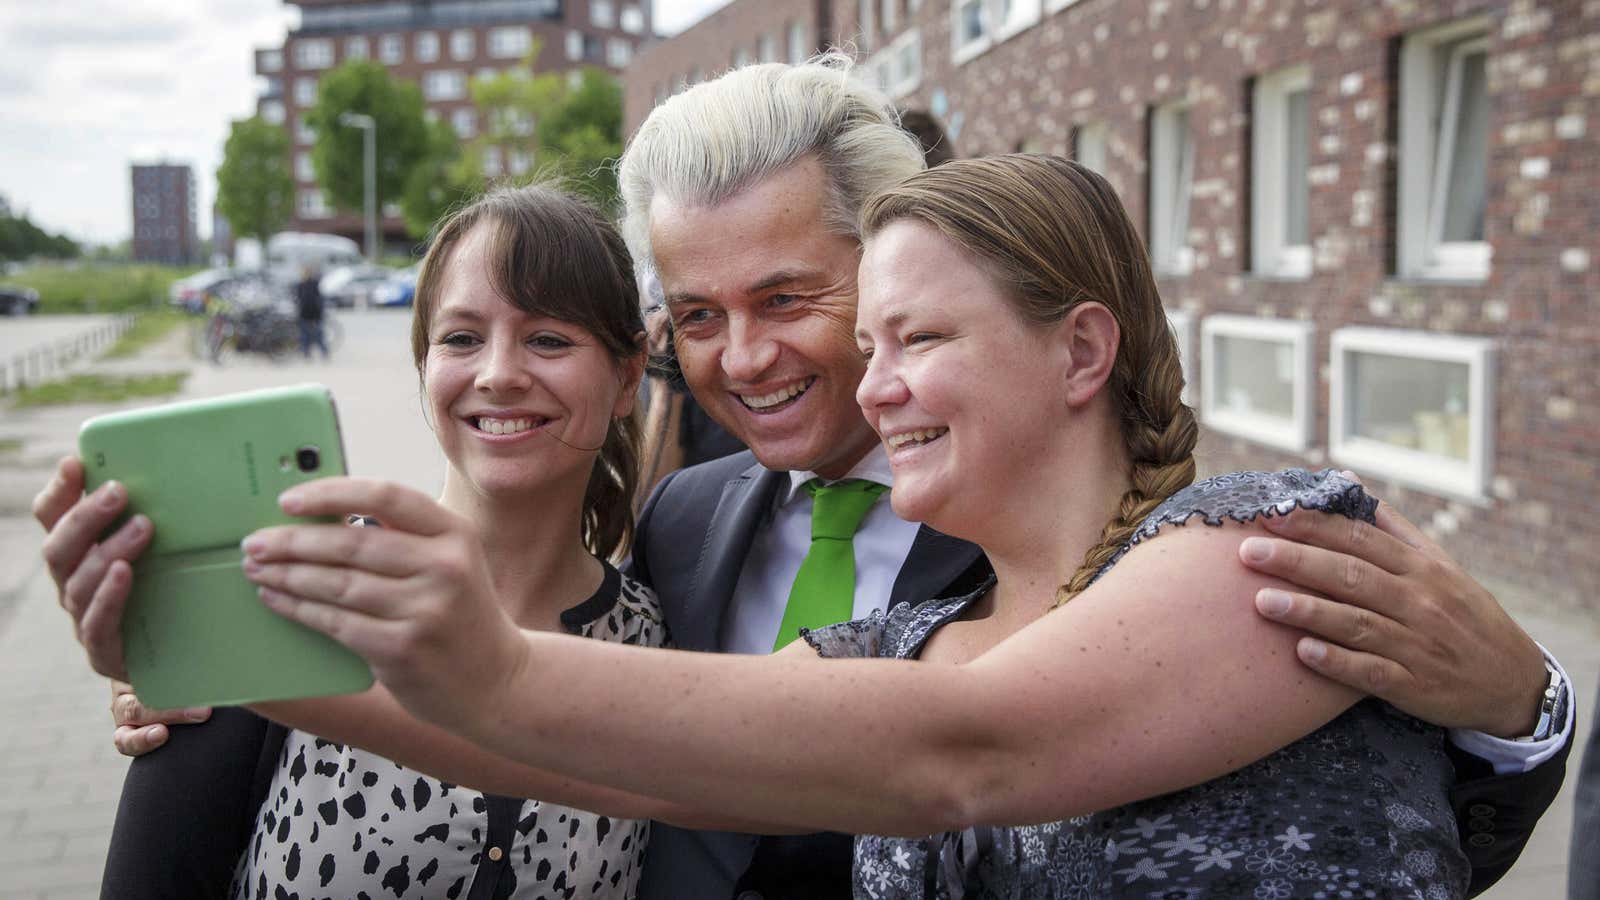 Geert Wilders, leader of the Dutch Freedom Party, poses for a selfie with supporters after casting his vote on May 22.